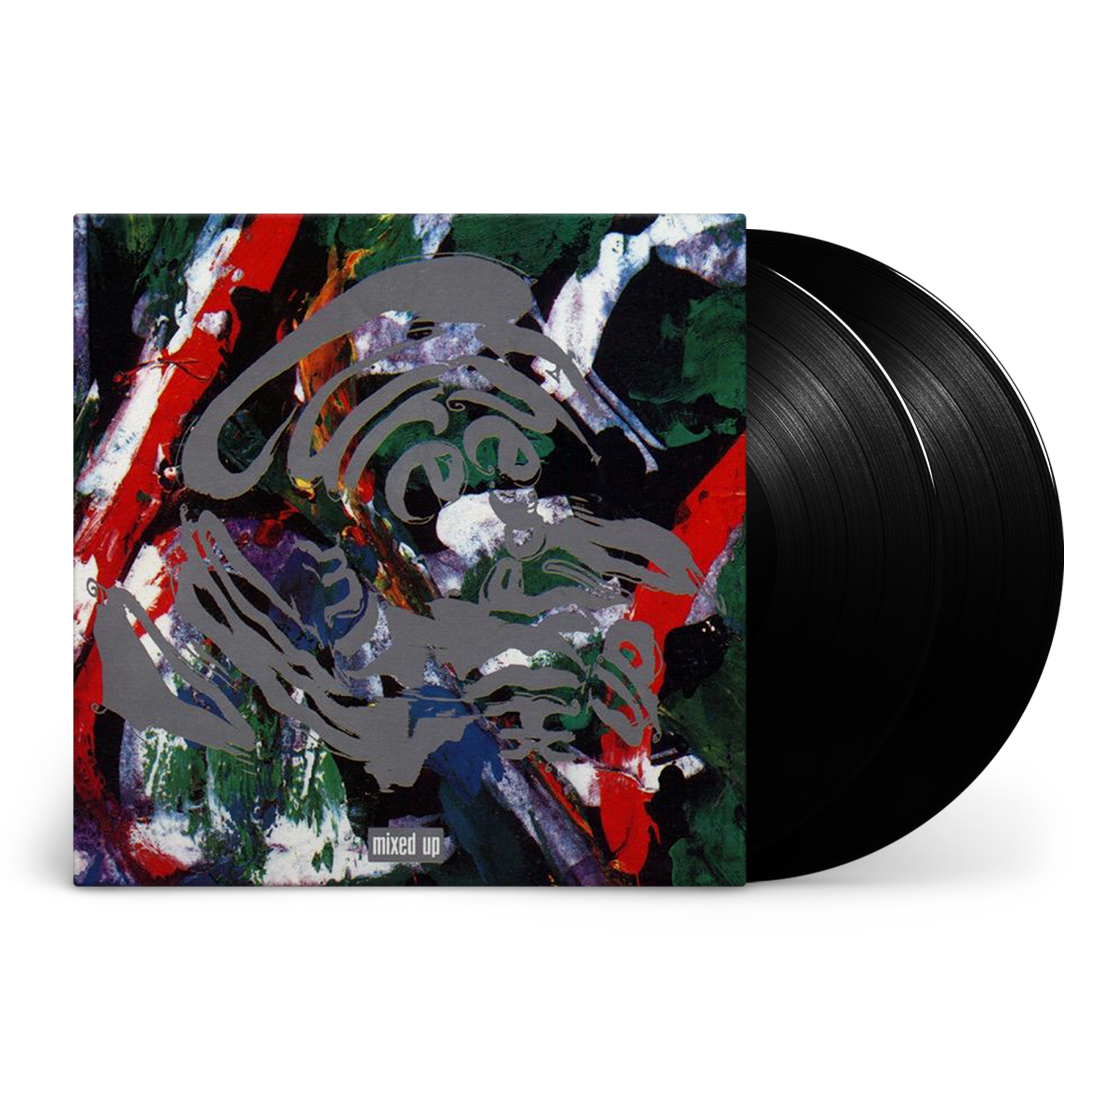 The Cure  - Mixed Up: Vinyl 2LP 